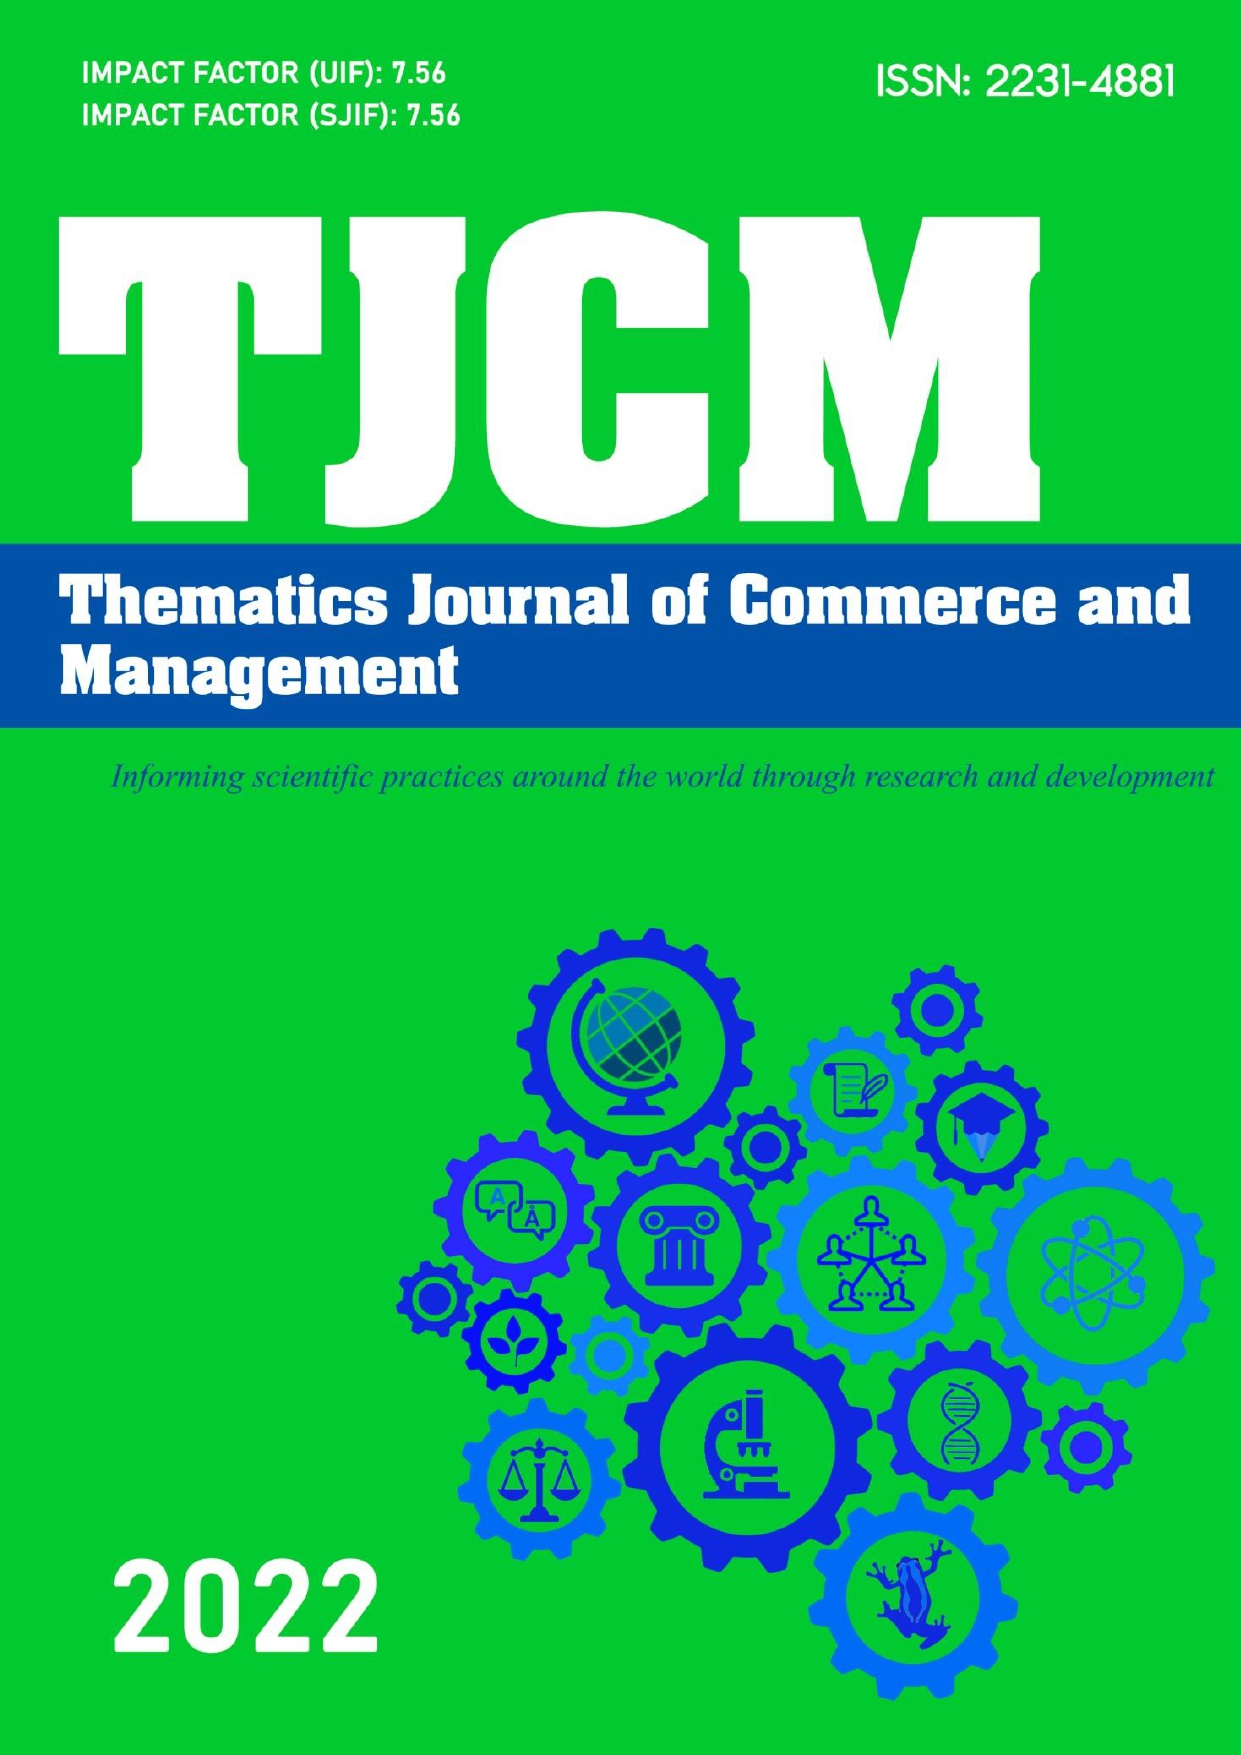 					View Vol. 6 No. 1 (2022): THEMATICS JOURNAL OF COMMERCE AND MANAGEMENT
				